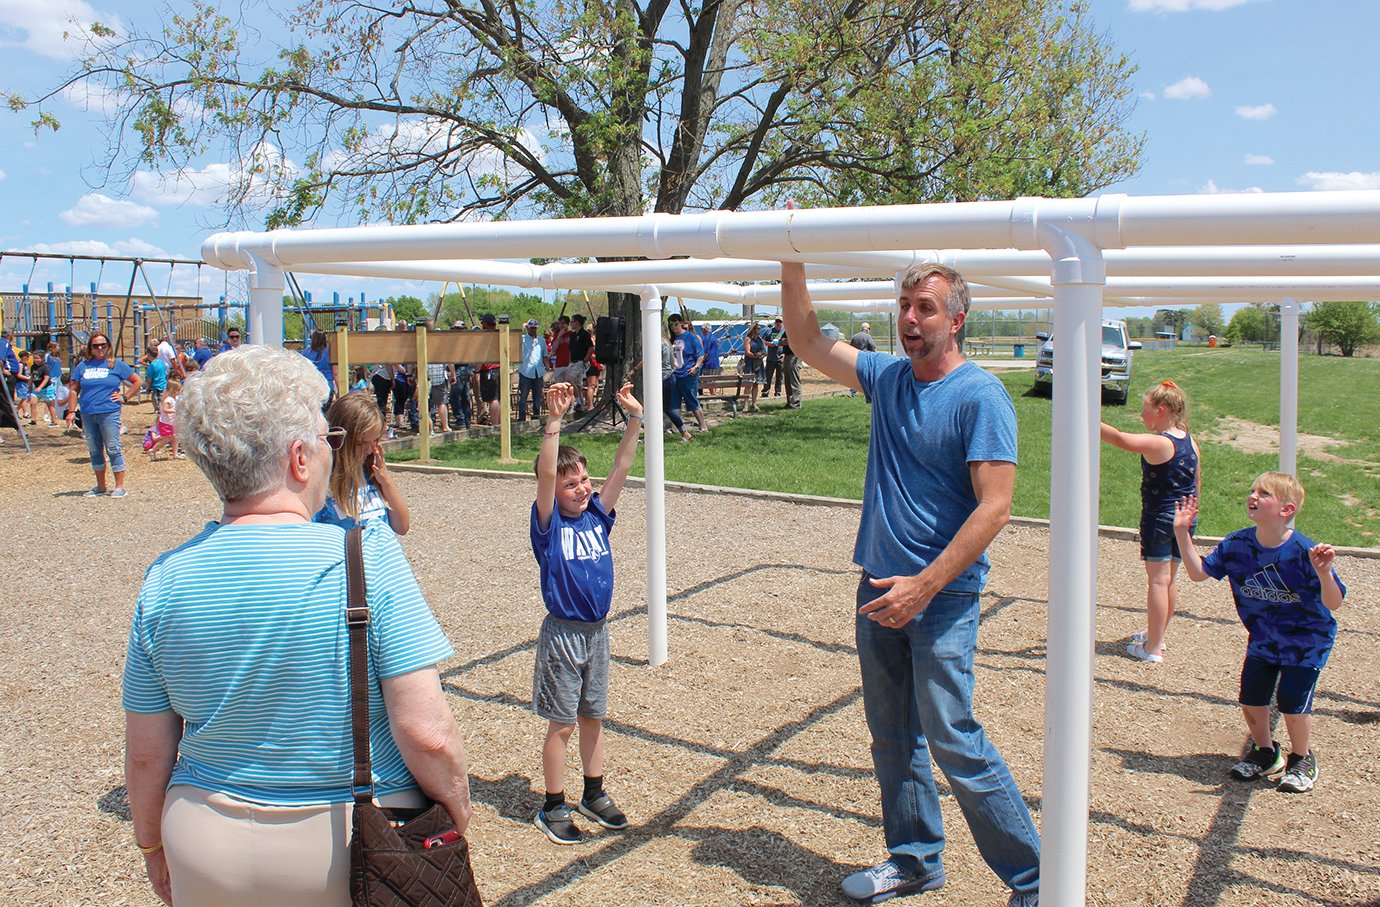 Students, staff, family and friends of the Schroll family immediately began checking out playground equipment recently installed as a playground extension called Parker